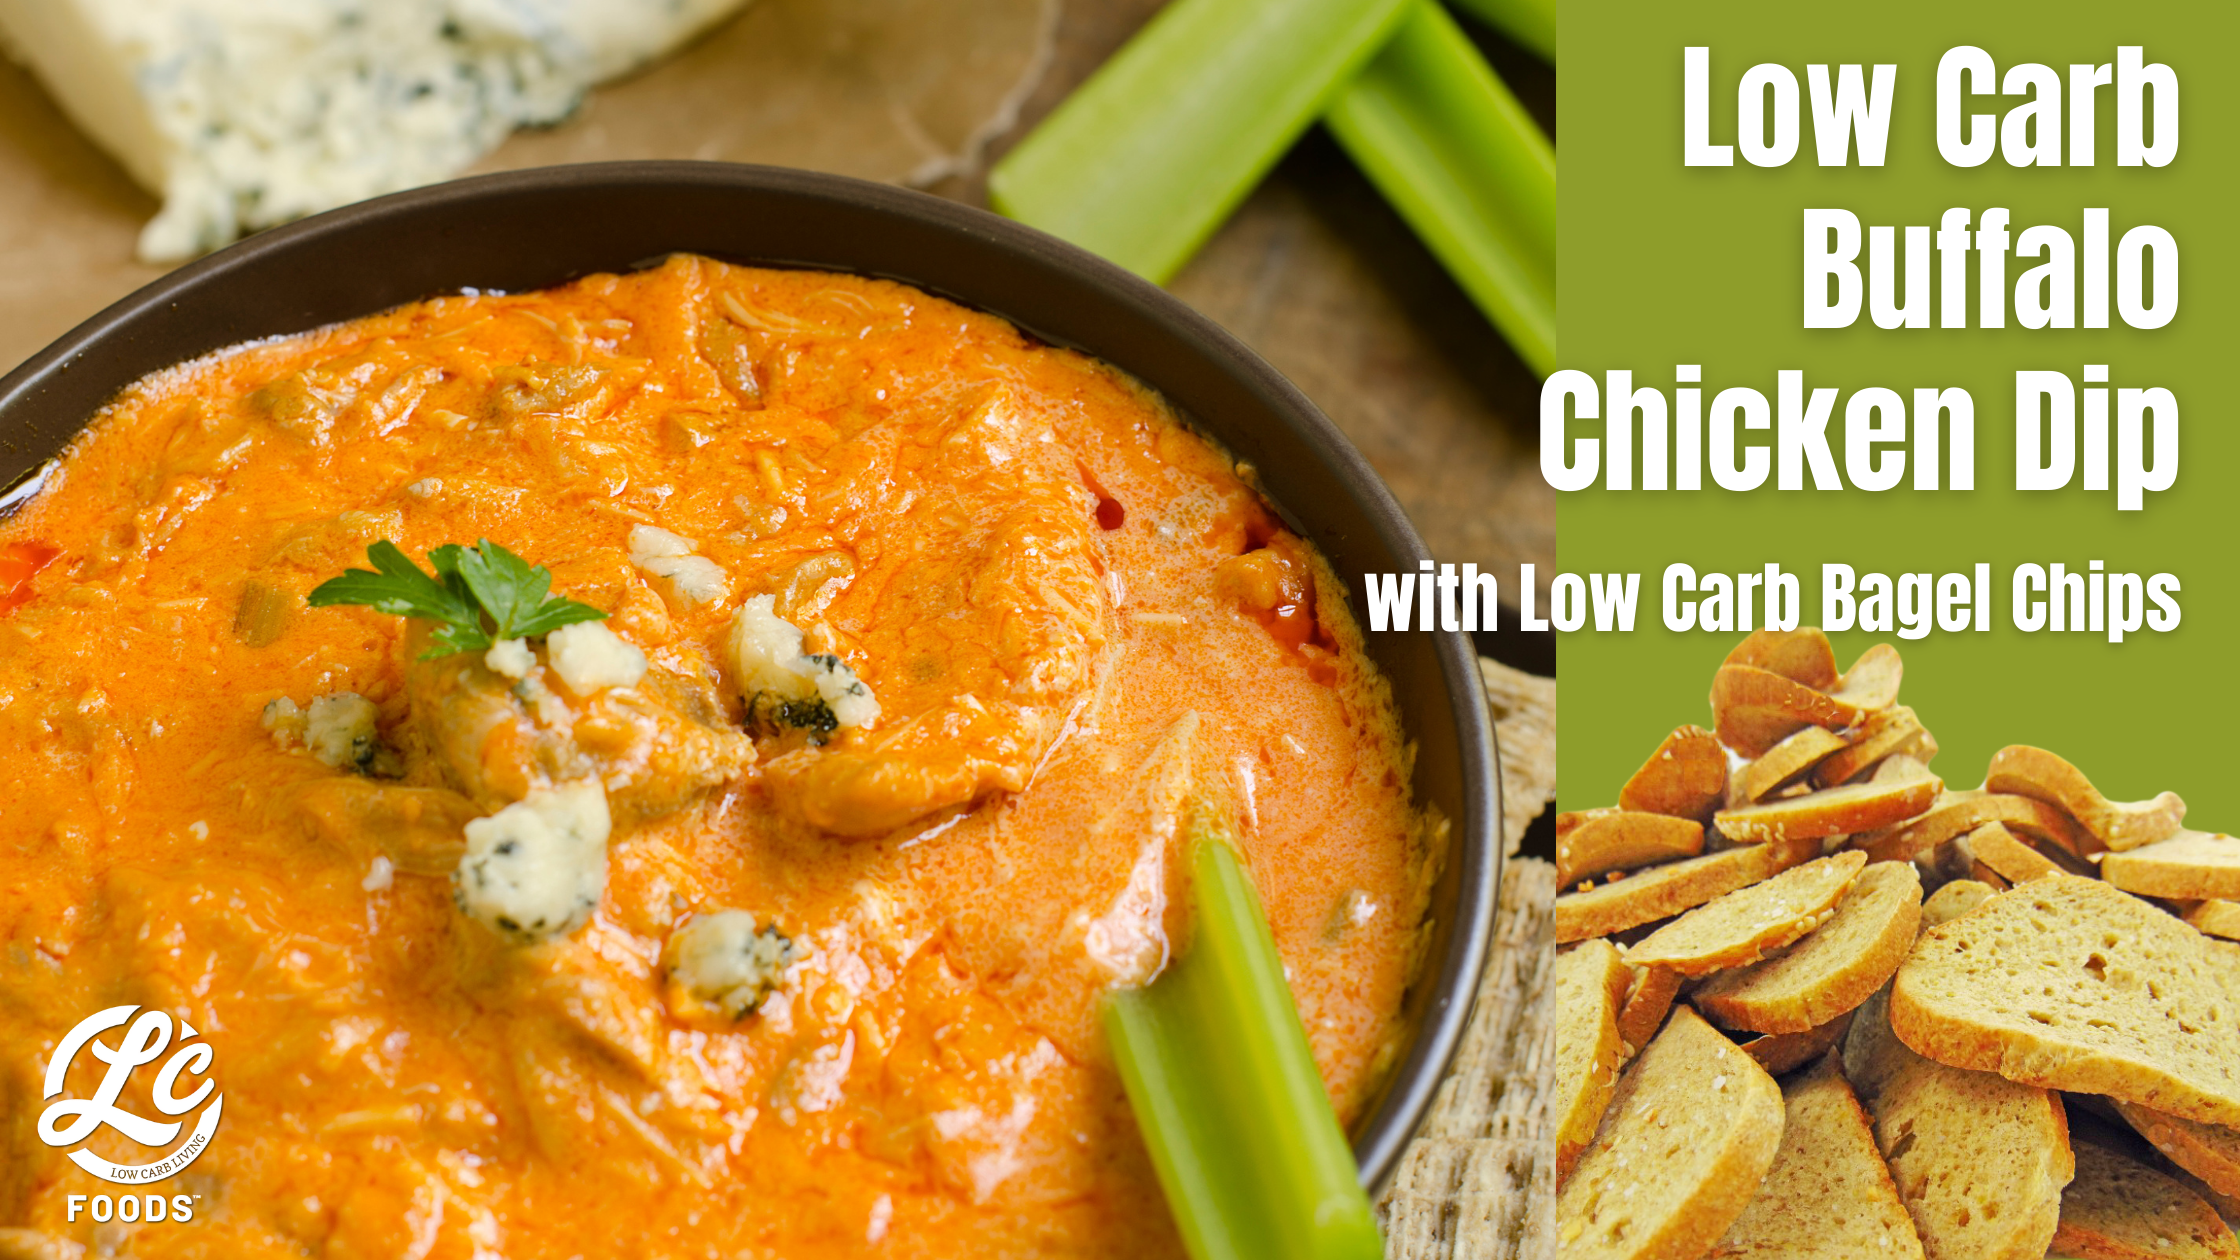 Thumbnail for Low Carb Buffalo Chicken Dip with LC Bagel Chips